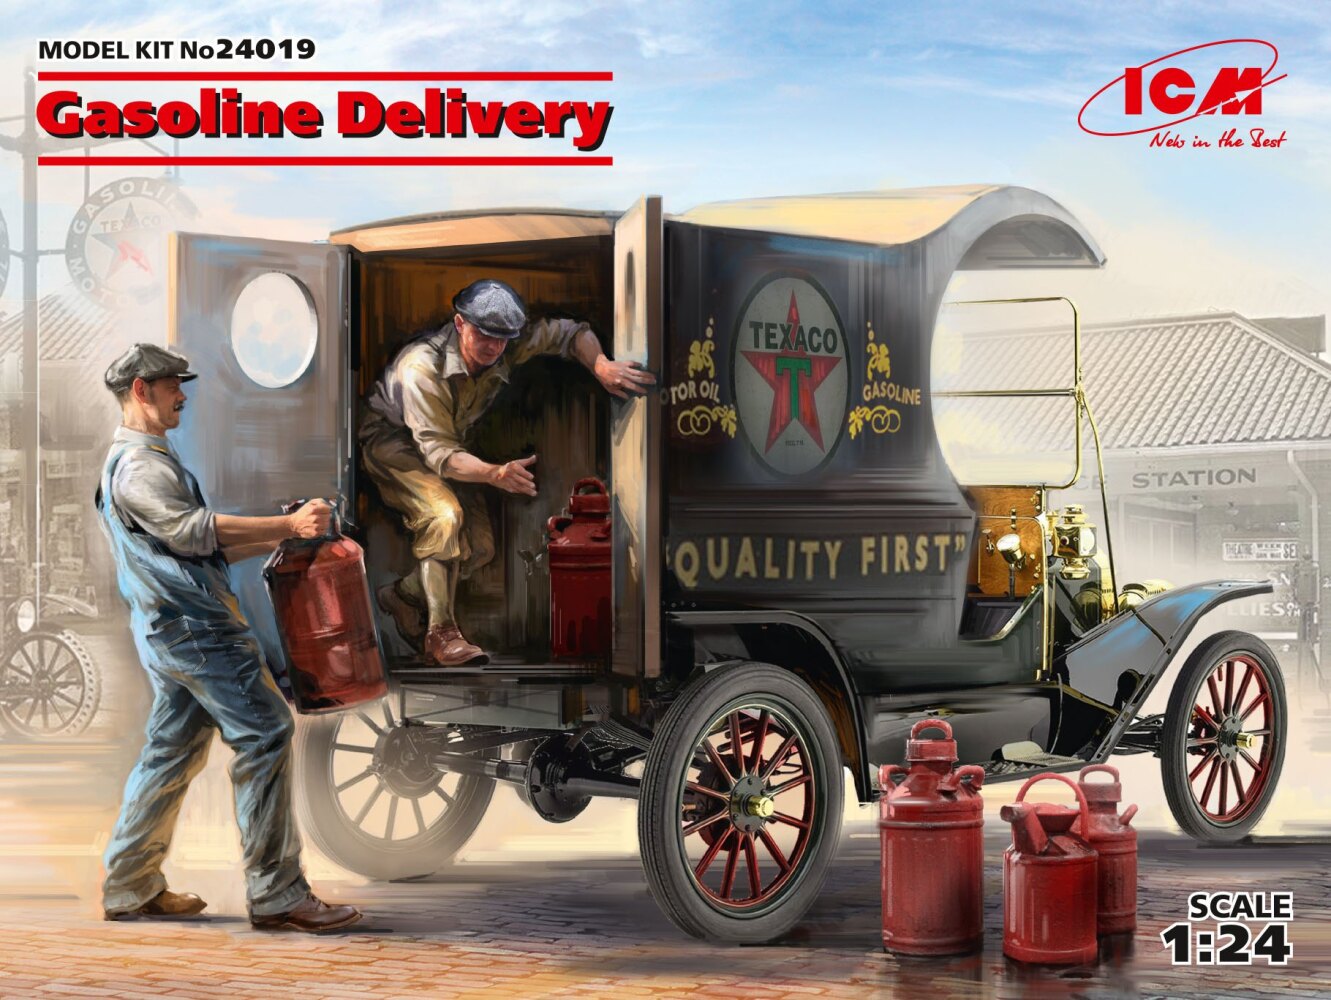 Gasoline Delivery, Model T 1912 Delivery Car with American Gasoline Loaders